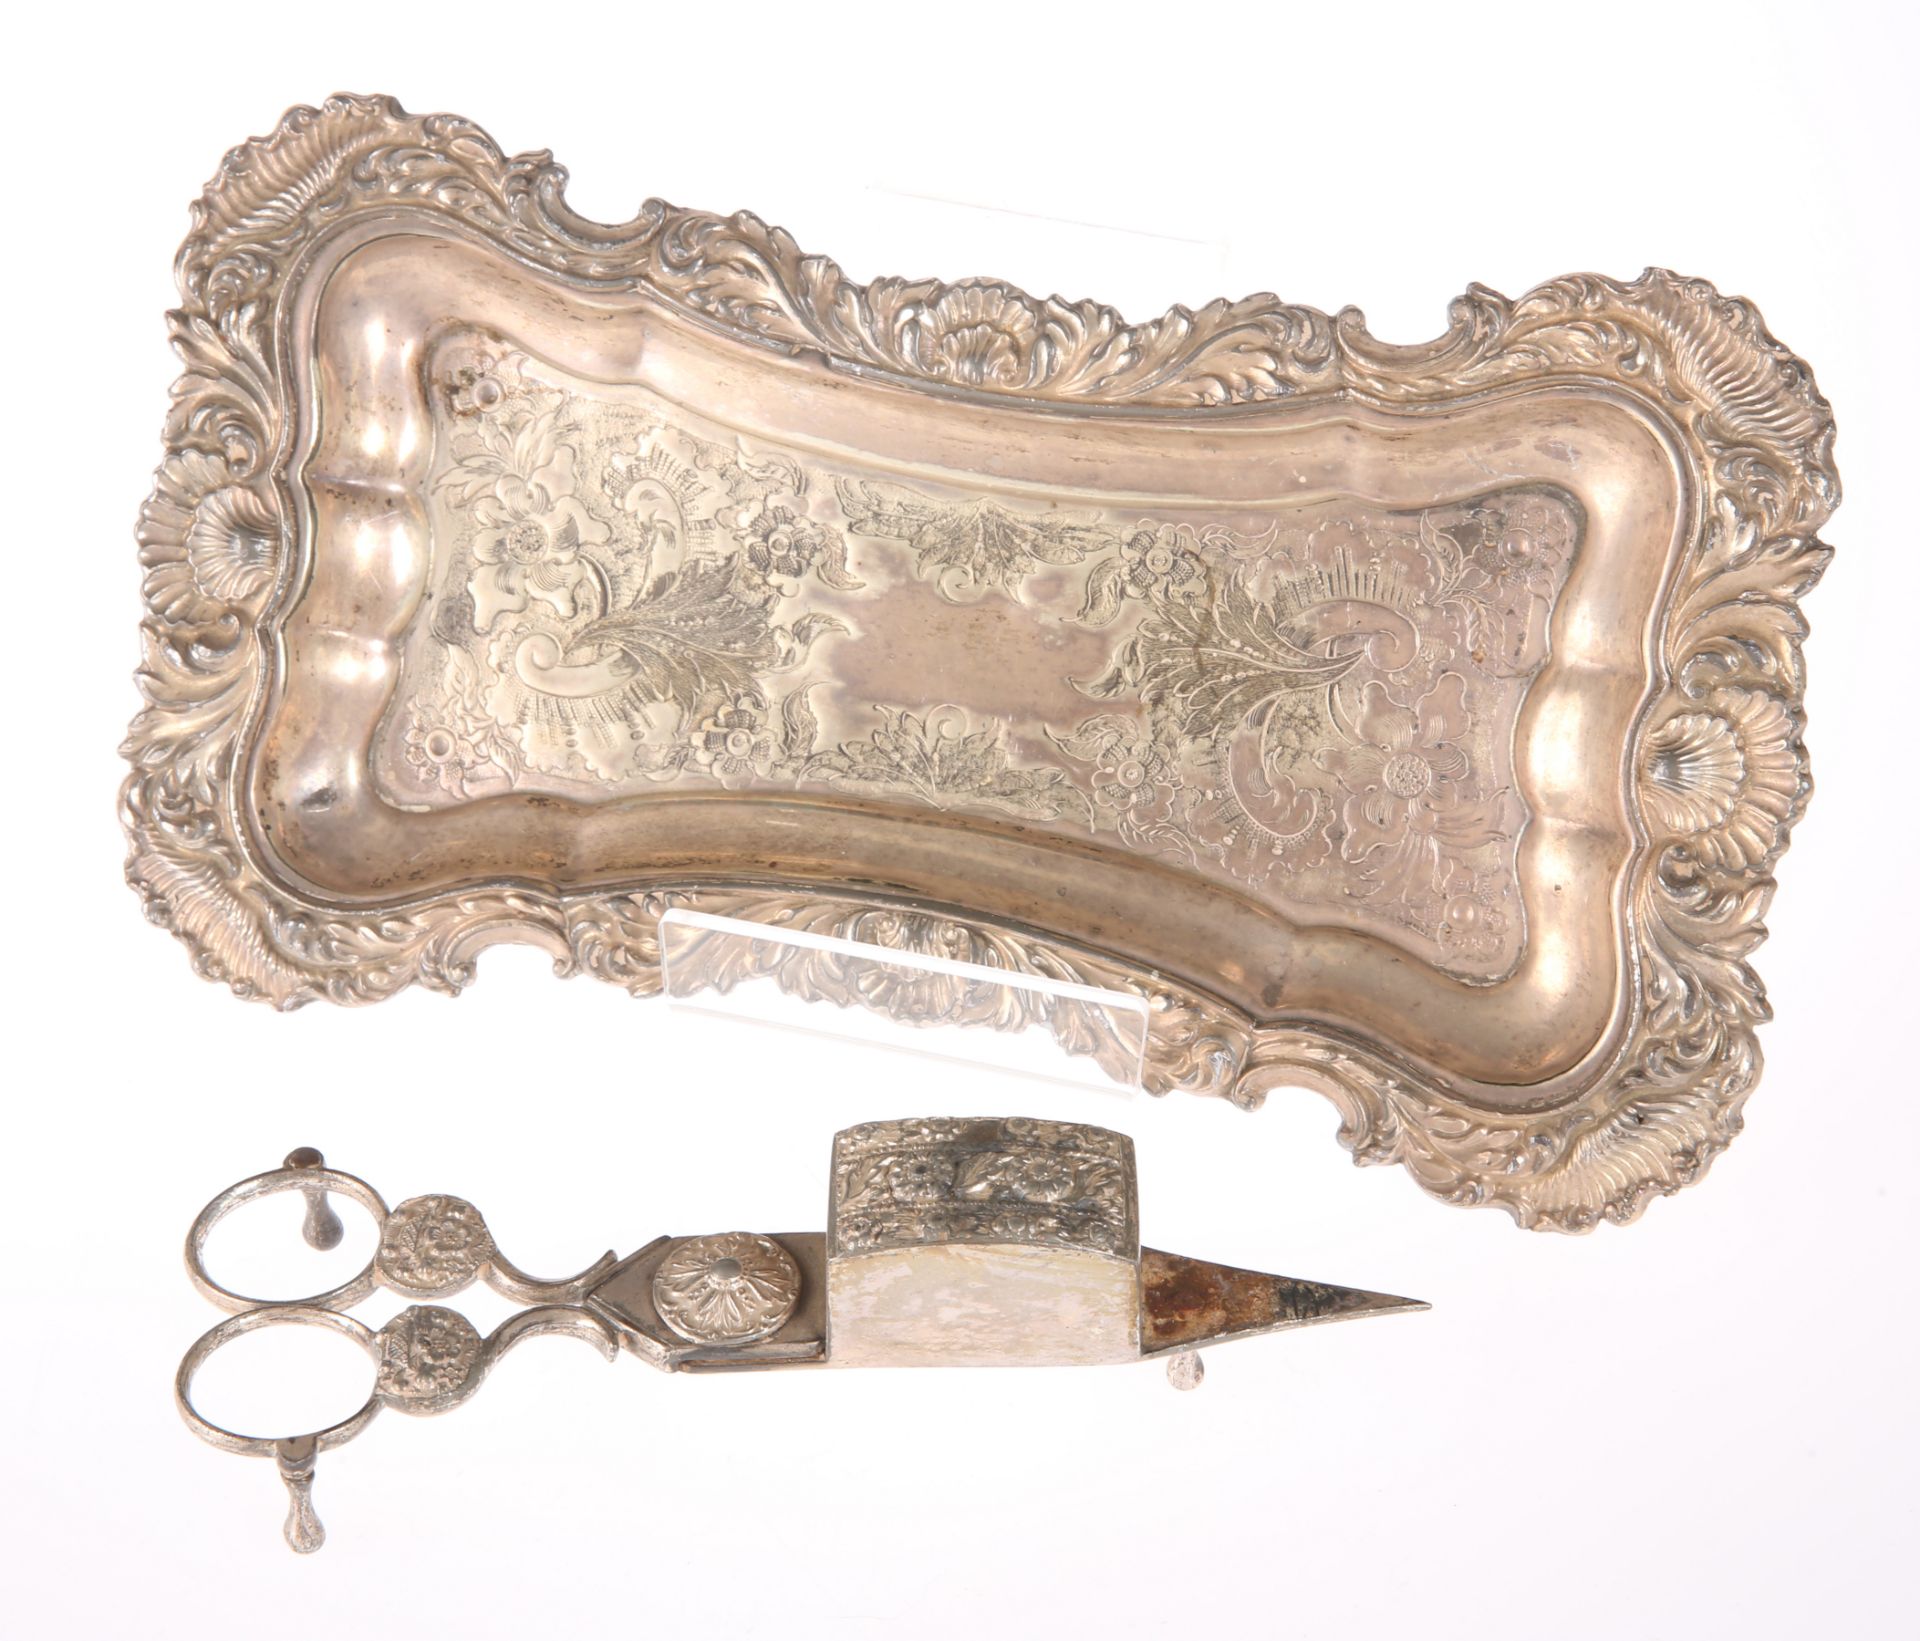 19TH CENTURY SILVER PLATED CANDLE SNUFFERS ON TRAY